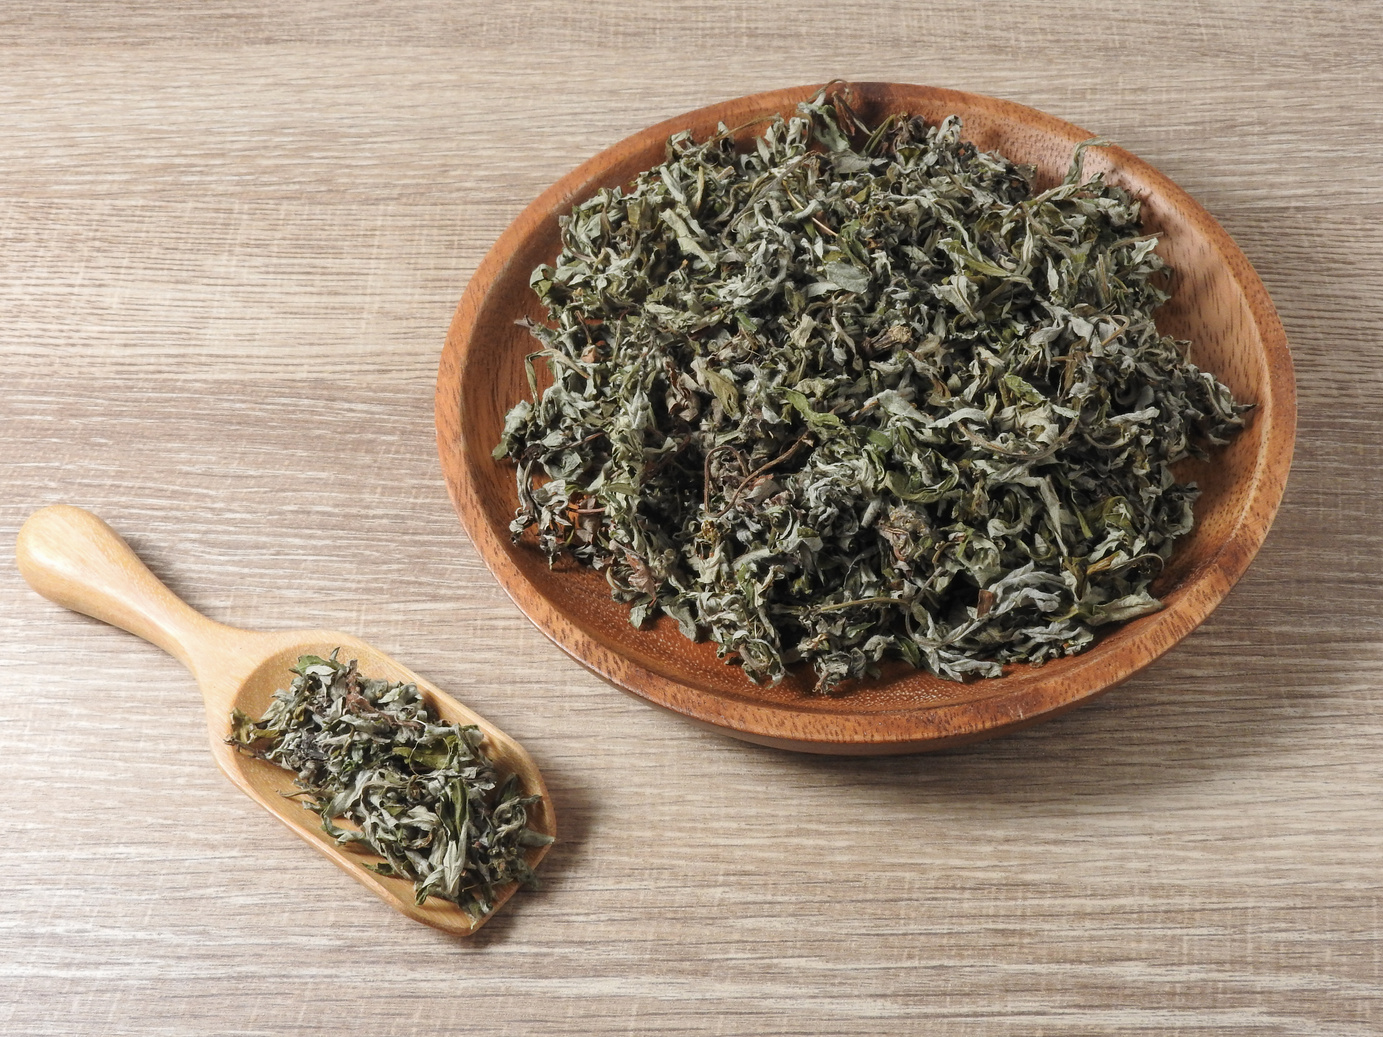  Dry Mugwort on Wooden Spoon and Plate